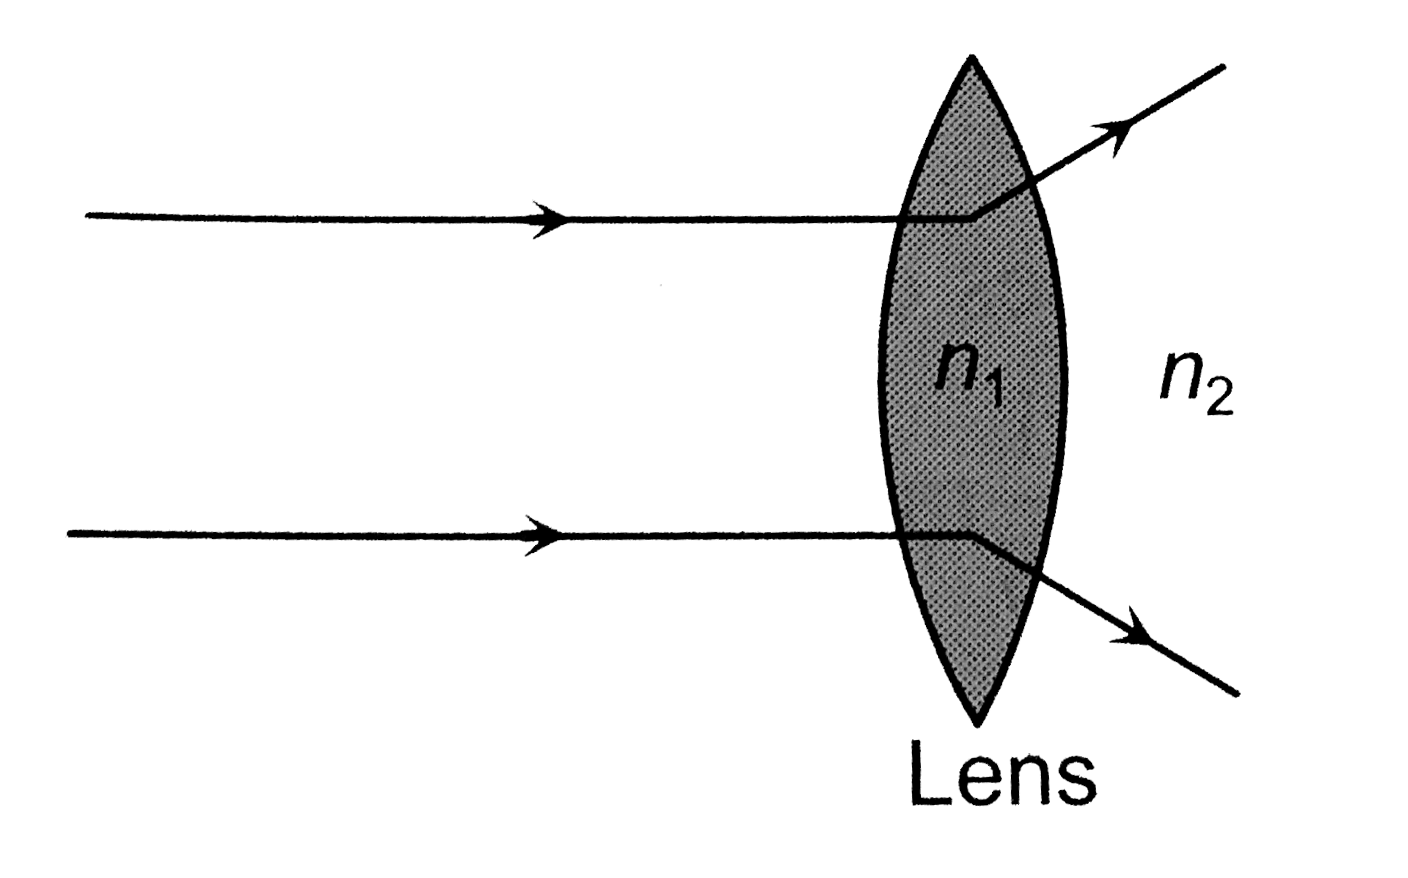 The relation between n(1) and n(2) , if behavior of light rays is as shown in figure is